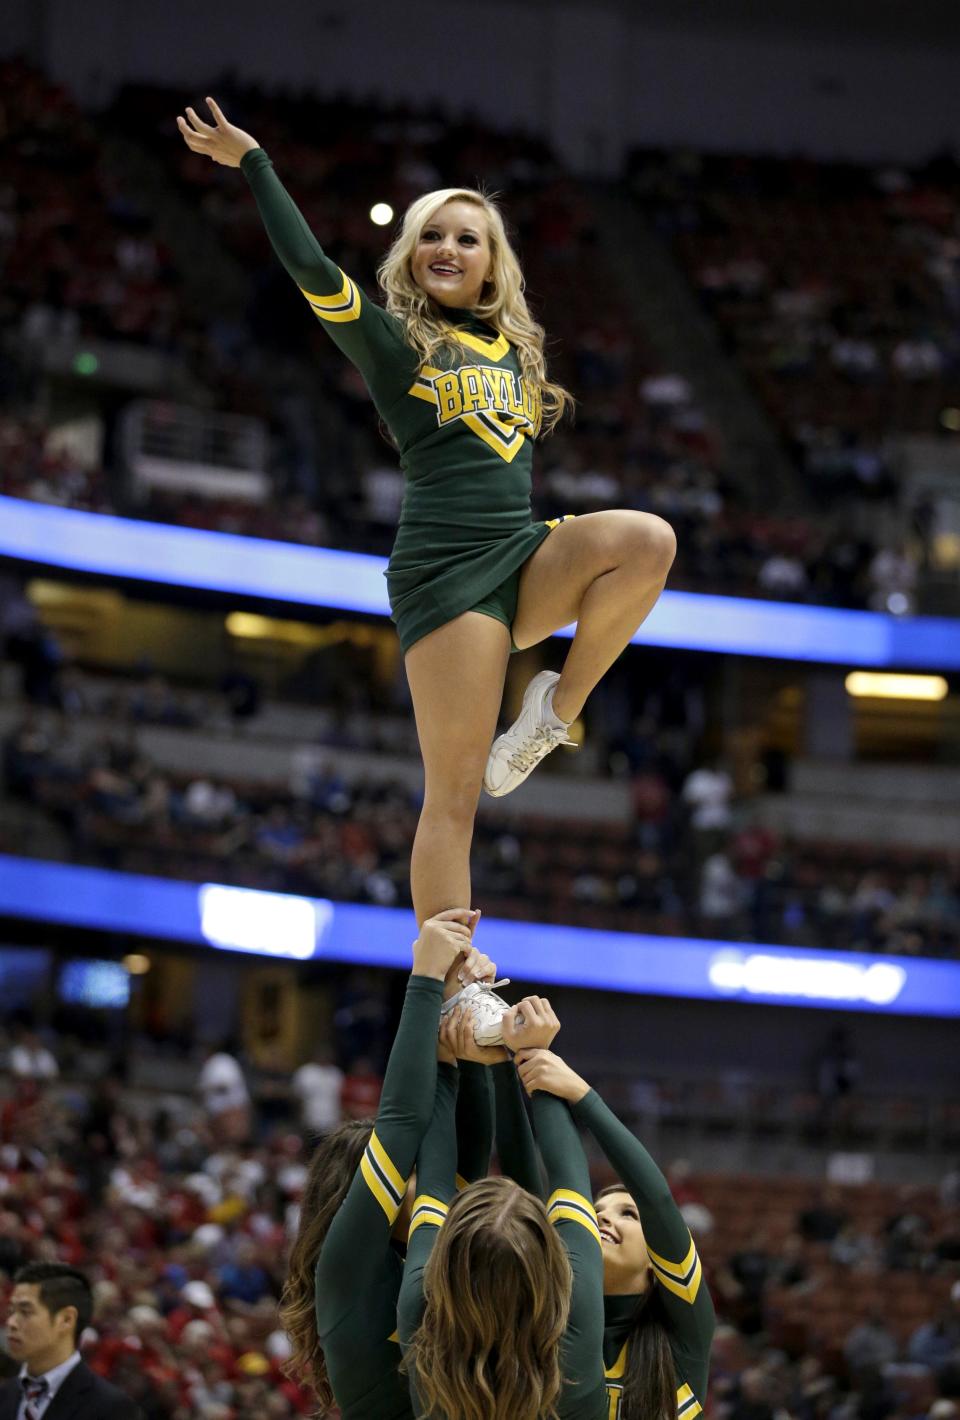 A Baylor cheerleader performs during a regional semifinal NCAA college basketball tournament game against Wisconsin, Thursday, March 27, 2014, in Anaheim, Calif. (AP Photo/Jae C. Hong)